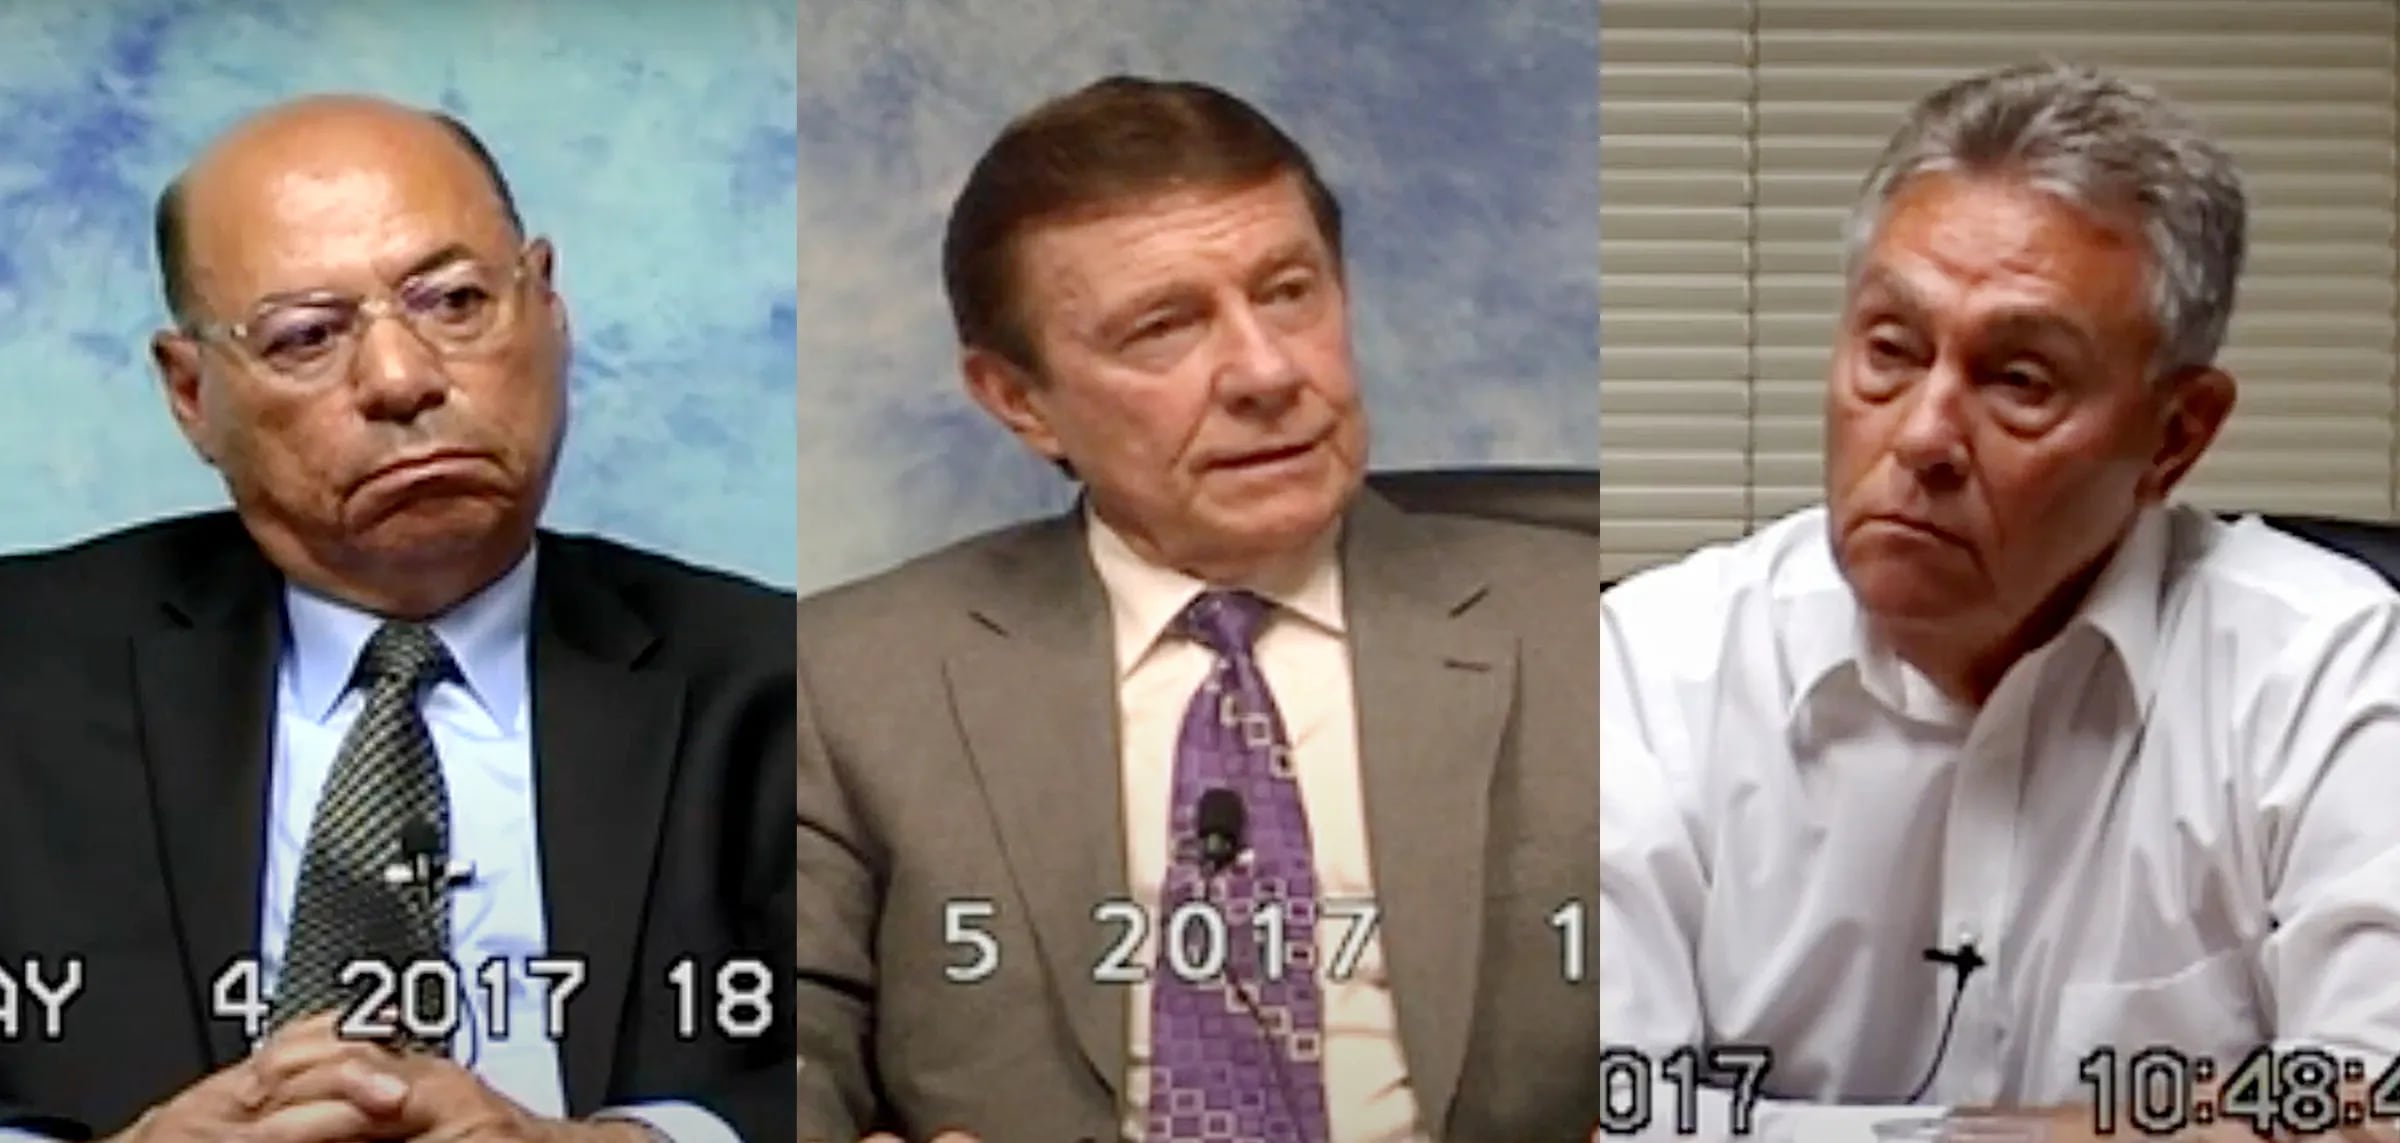 THE CASE THAT COLLAPSED Retired homicide detectives Manuel Santiago, Martin Devlin, and Frank Jastrzembski are seen in screen grabs from video of their 2017 depositions. 